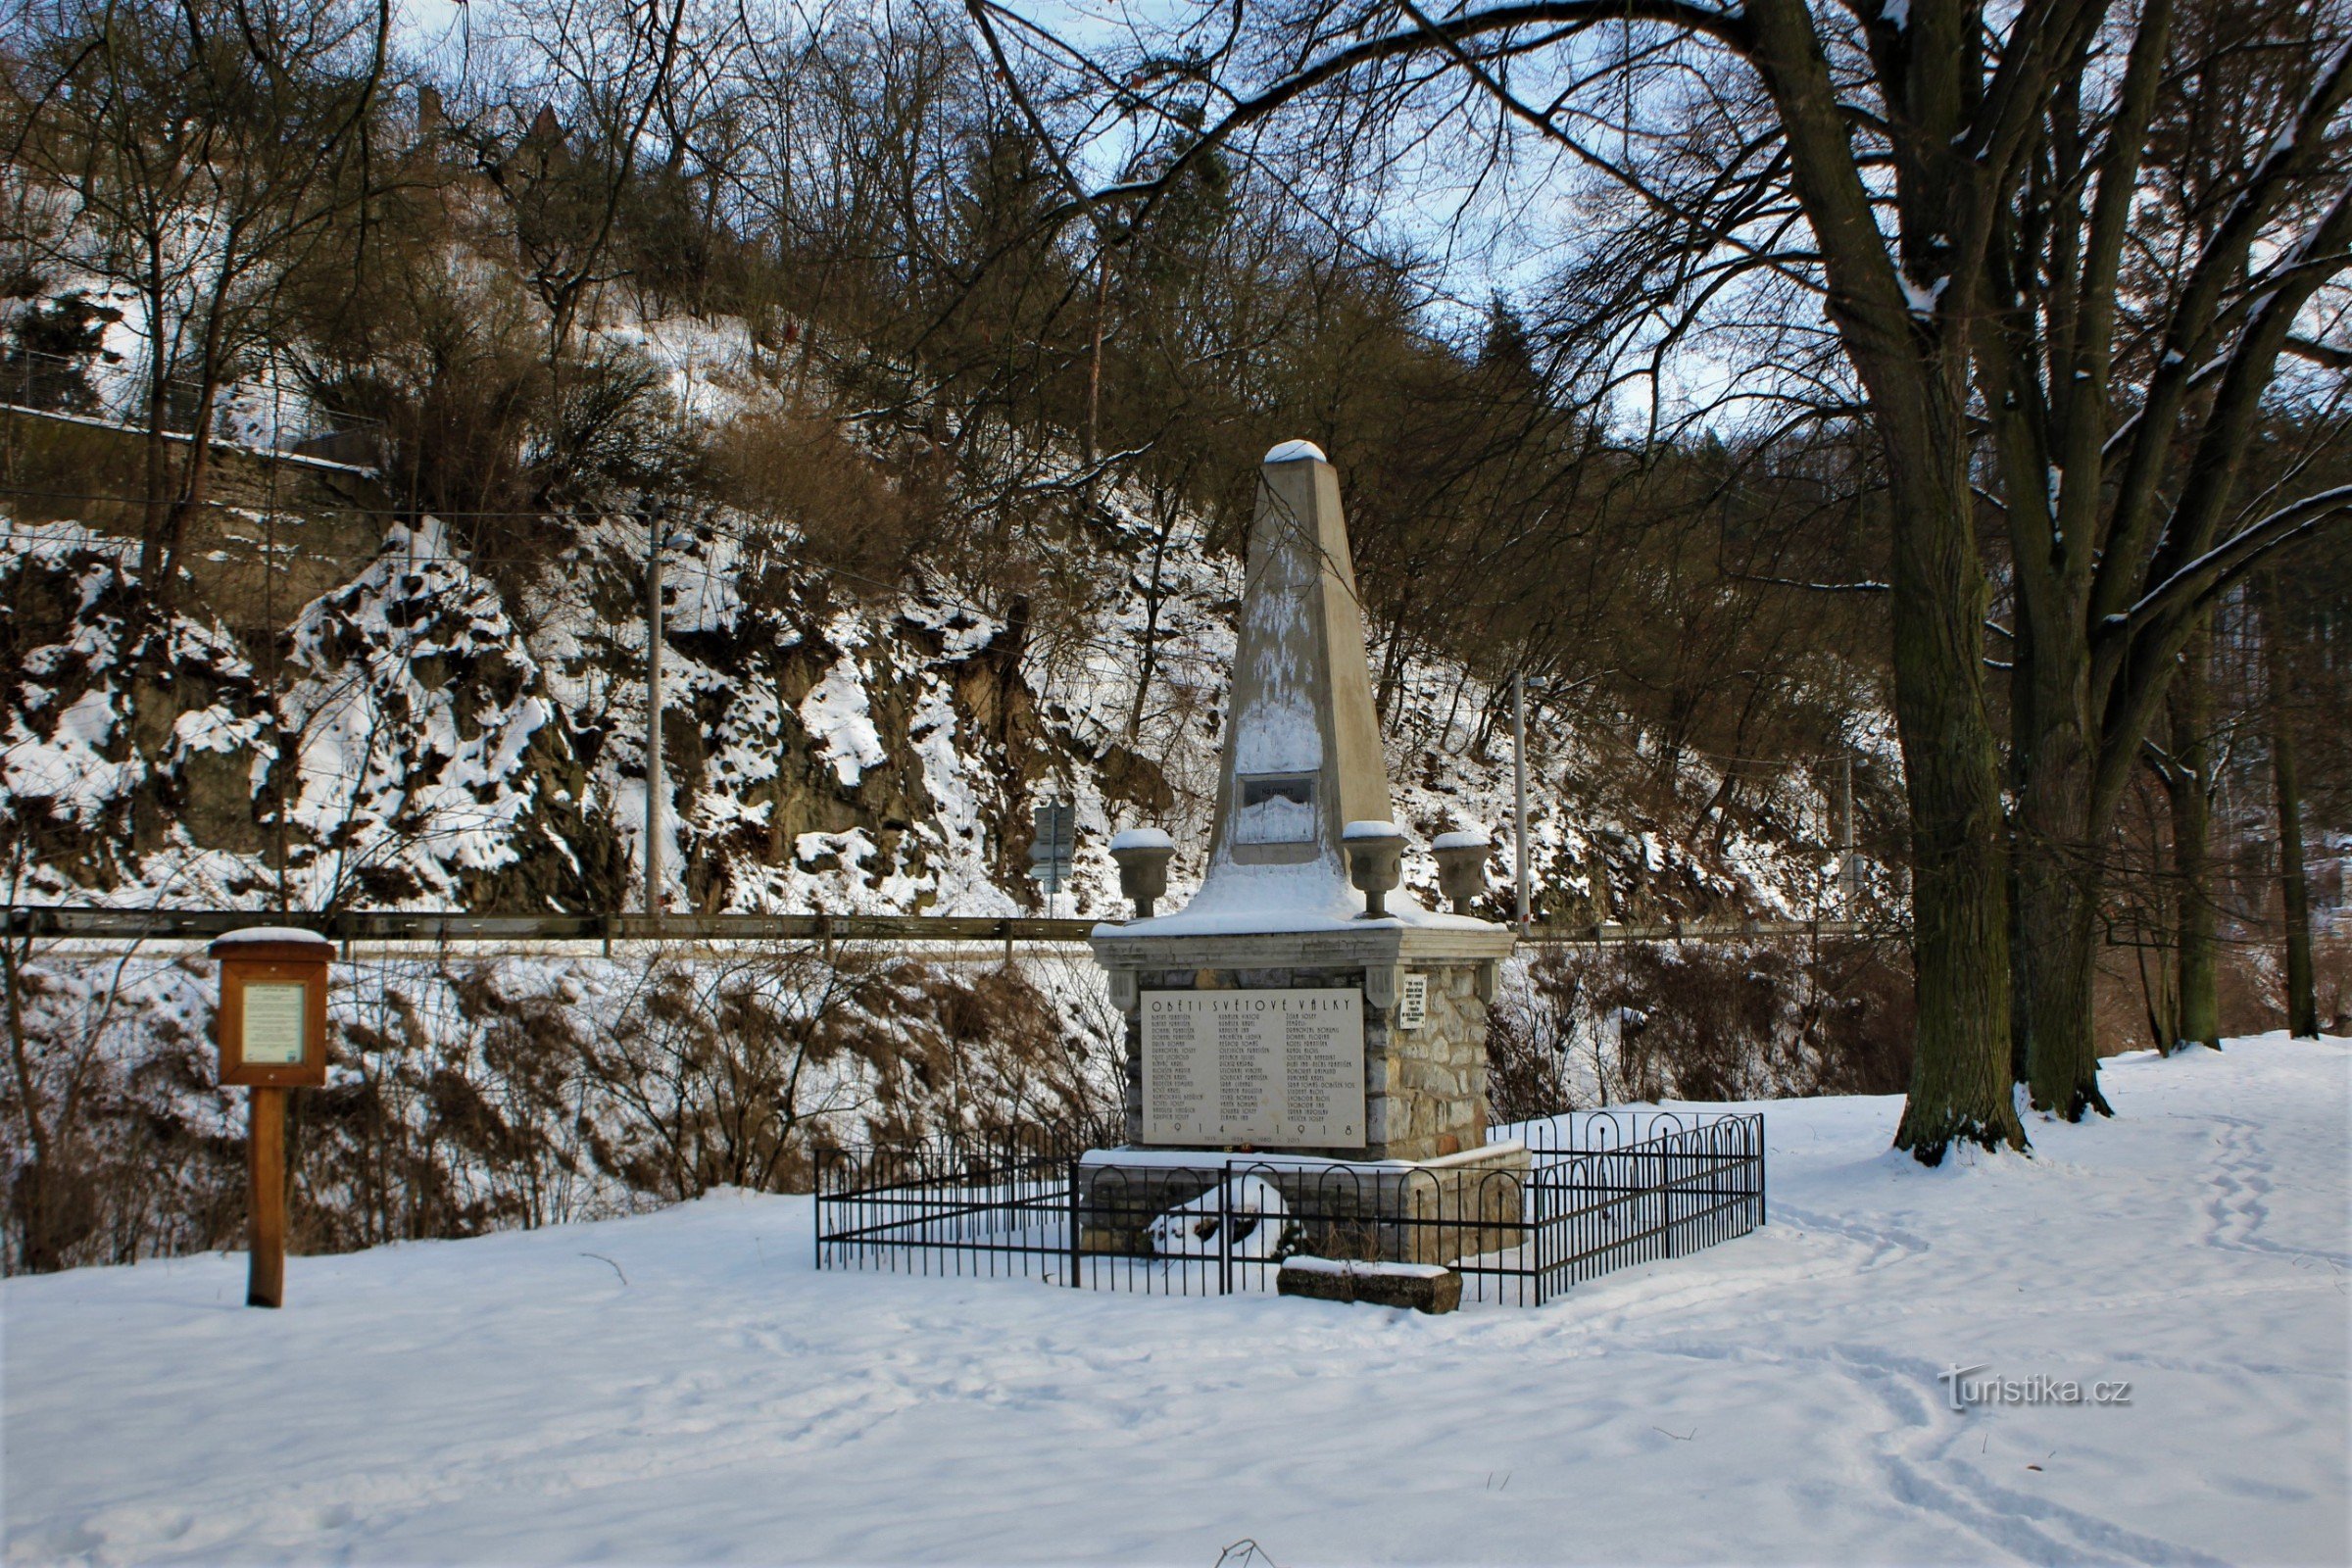 An island with a memorial to those who died in the First World War